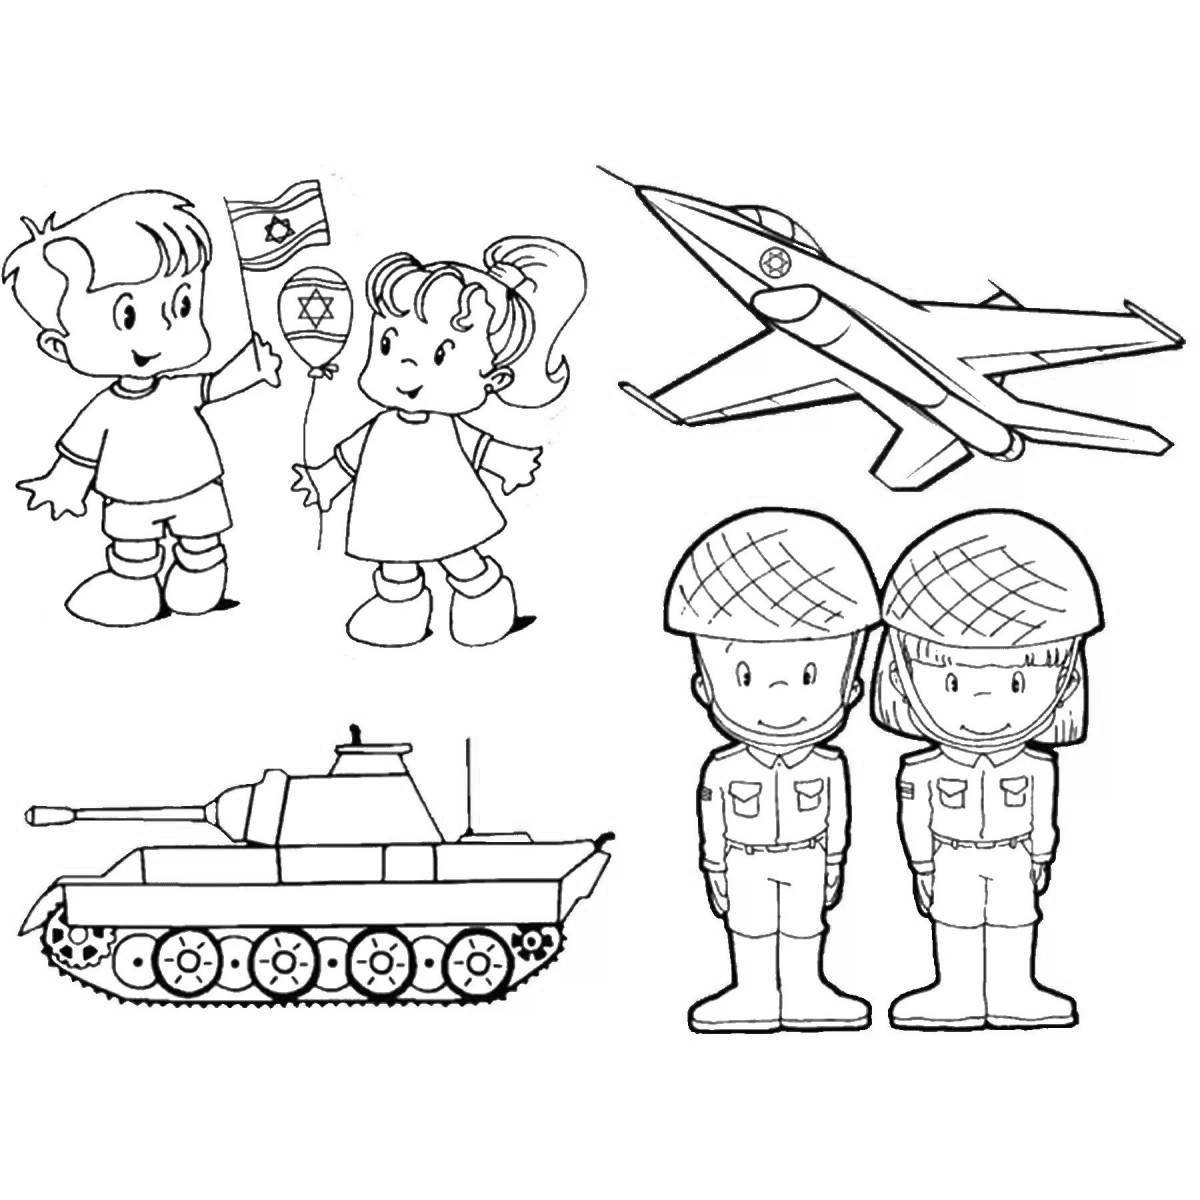 Bright tanker coloring page